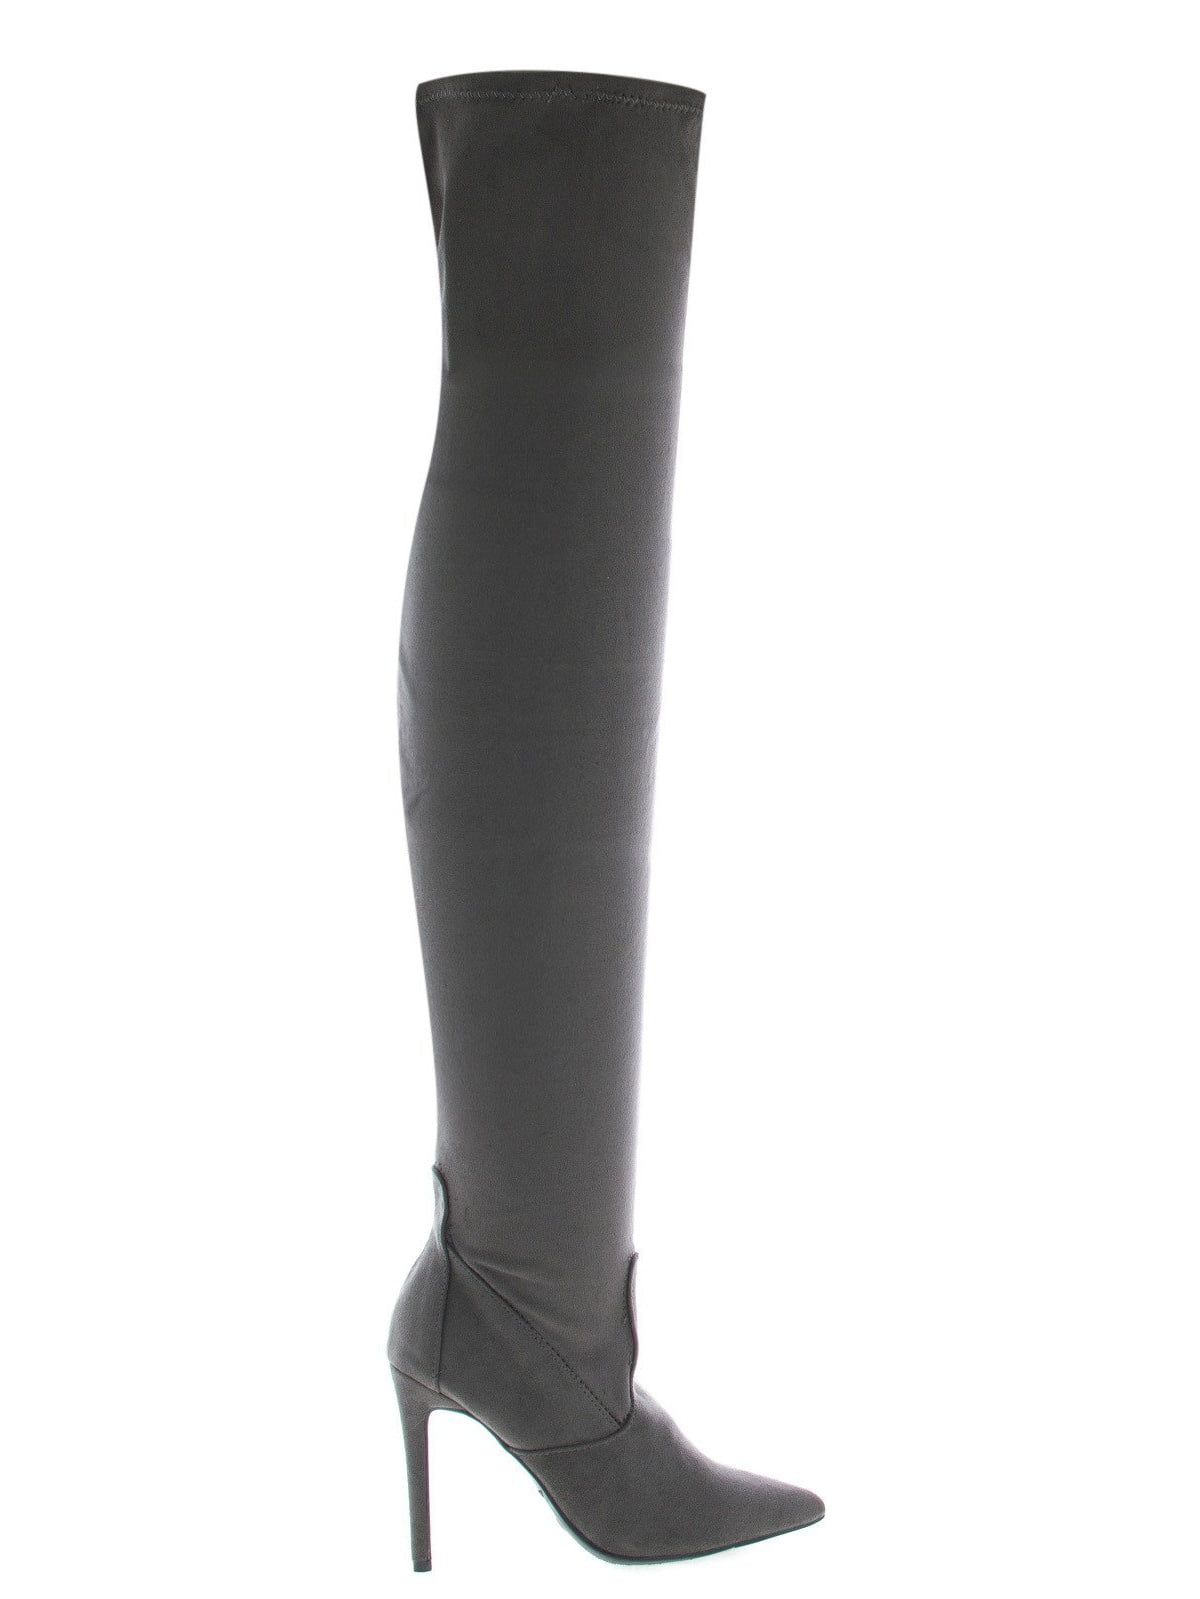 Riseup54S by Anne Michelle, Black Suede Pull On OTK Thigh High Over The Knee High Heel Dress Boot... | Walmart (US)